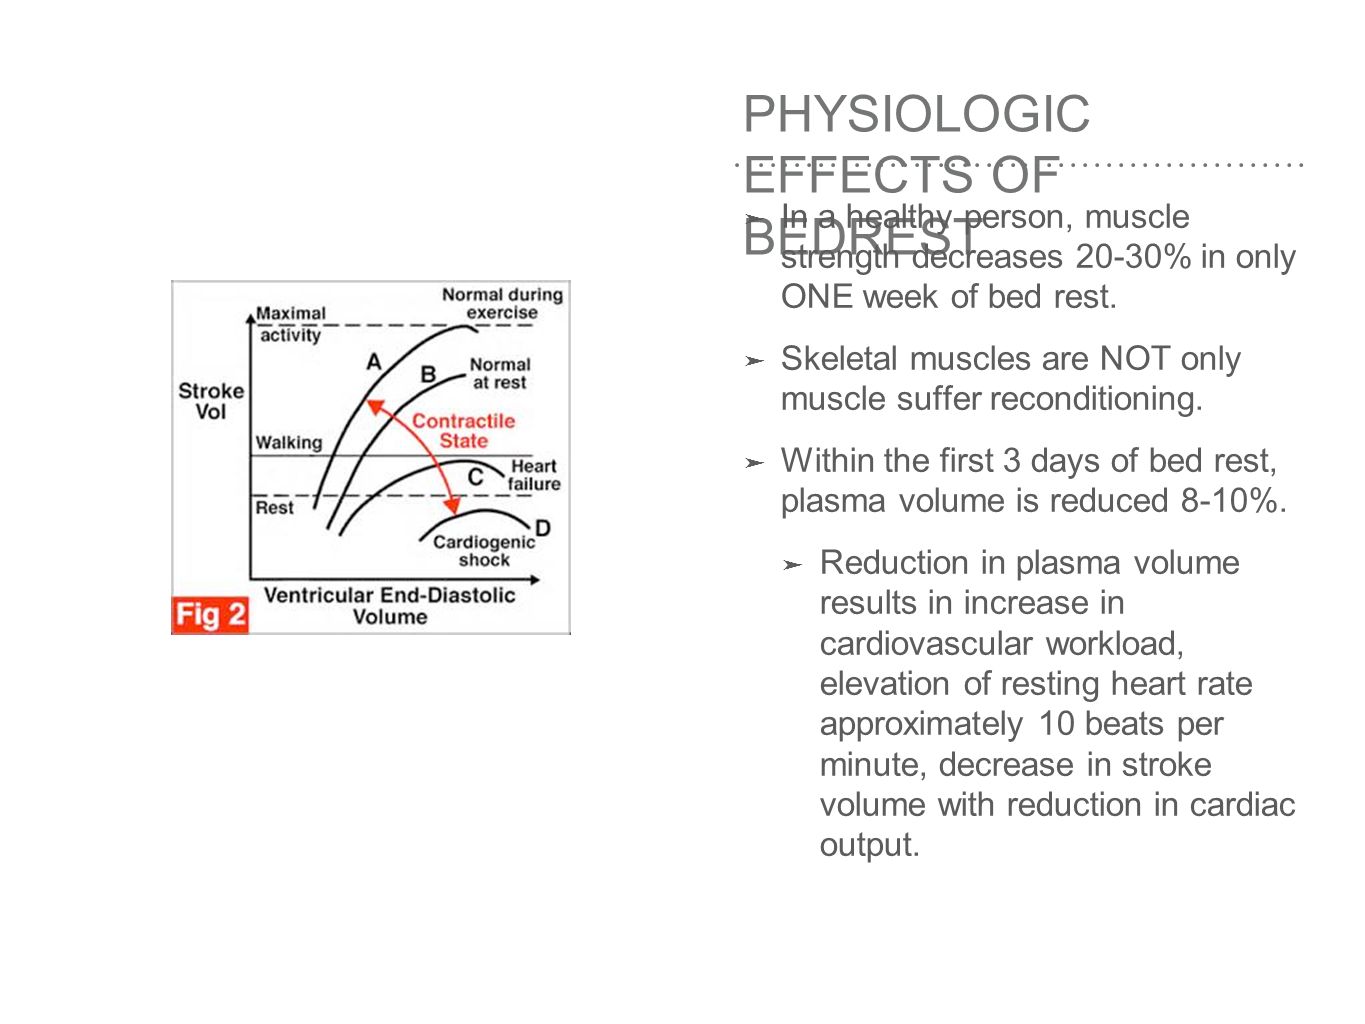 PHYSIOLOGIC EFFECTS OF BEDREST ➤ In a healthy person, muscle strength decreases 20-30% in only ONE week of bed rest.